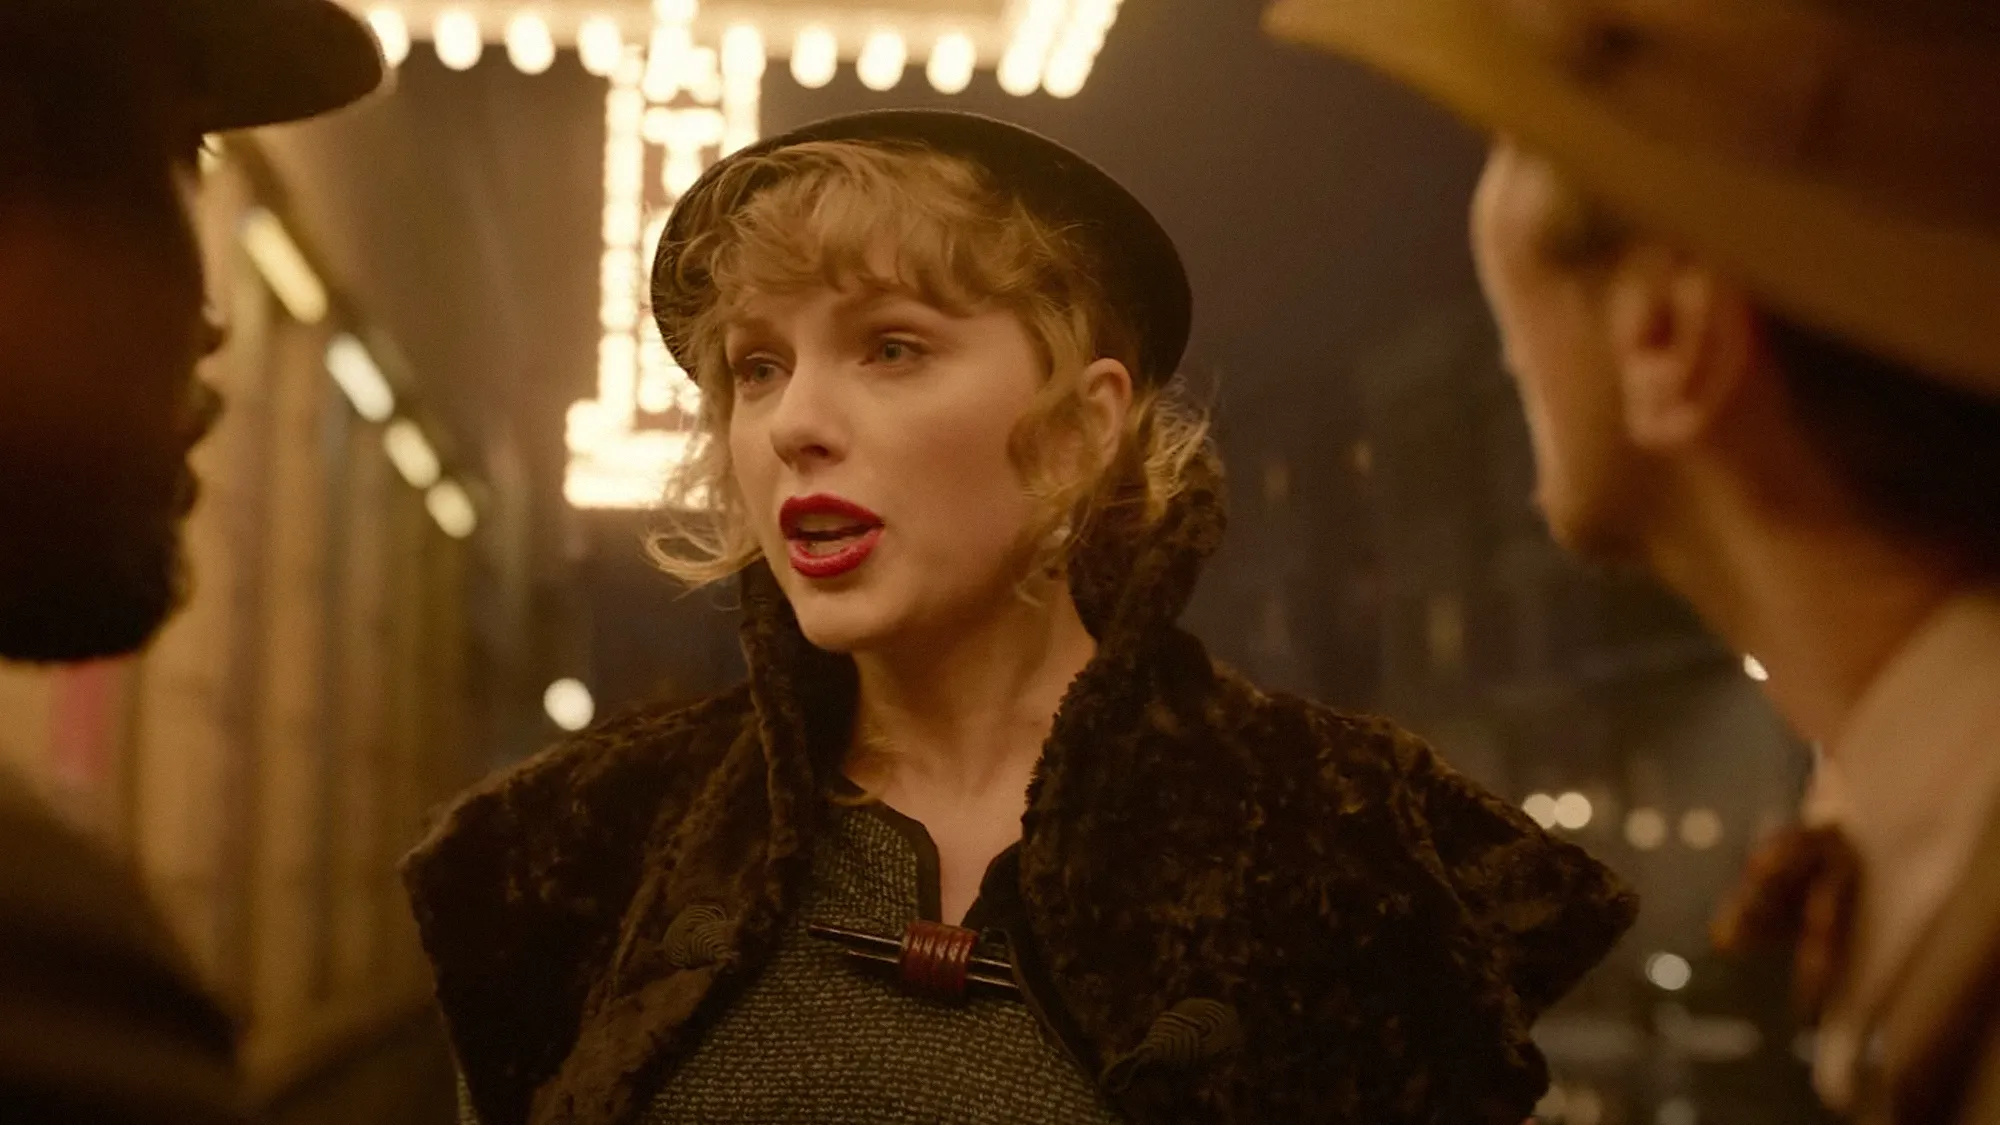 Taylor Swift to Direct Feature Film For Disney’s Searchlight Pictures